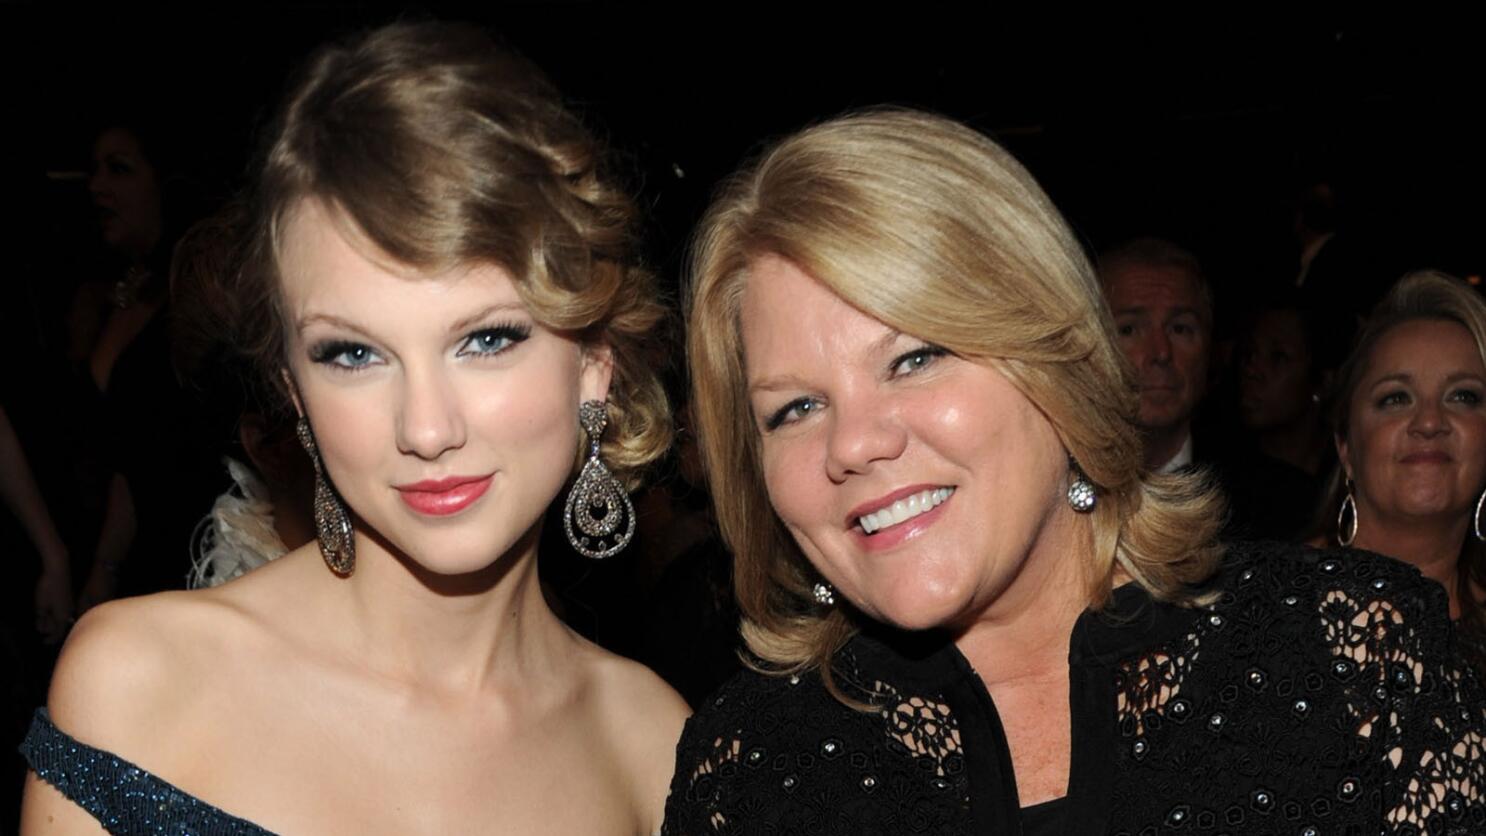 "Taylor Swift Shares Rare Family Insights About Mom Andrea During Singapore Performance"